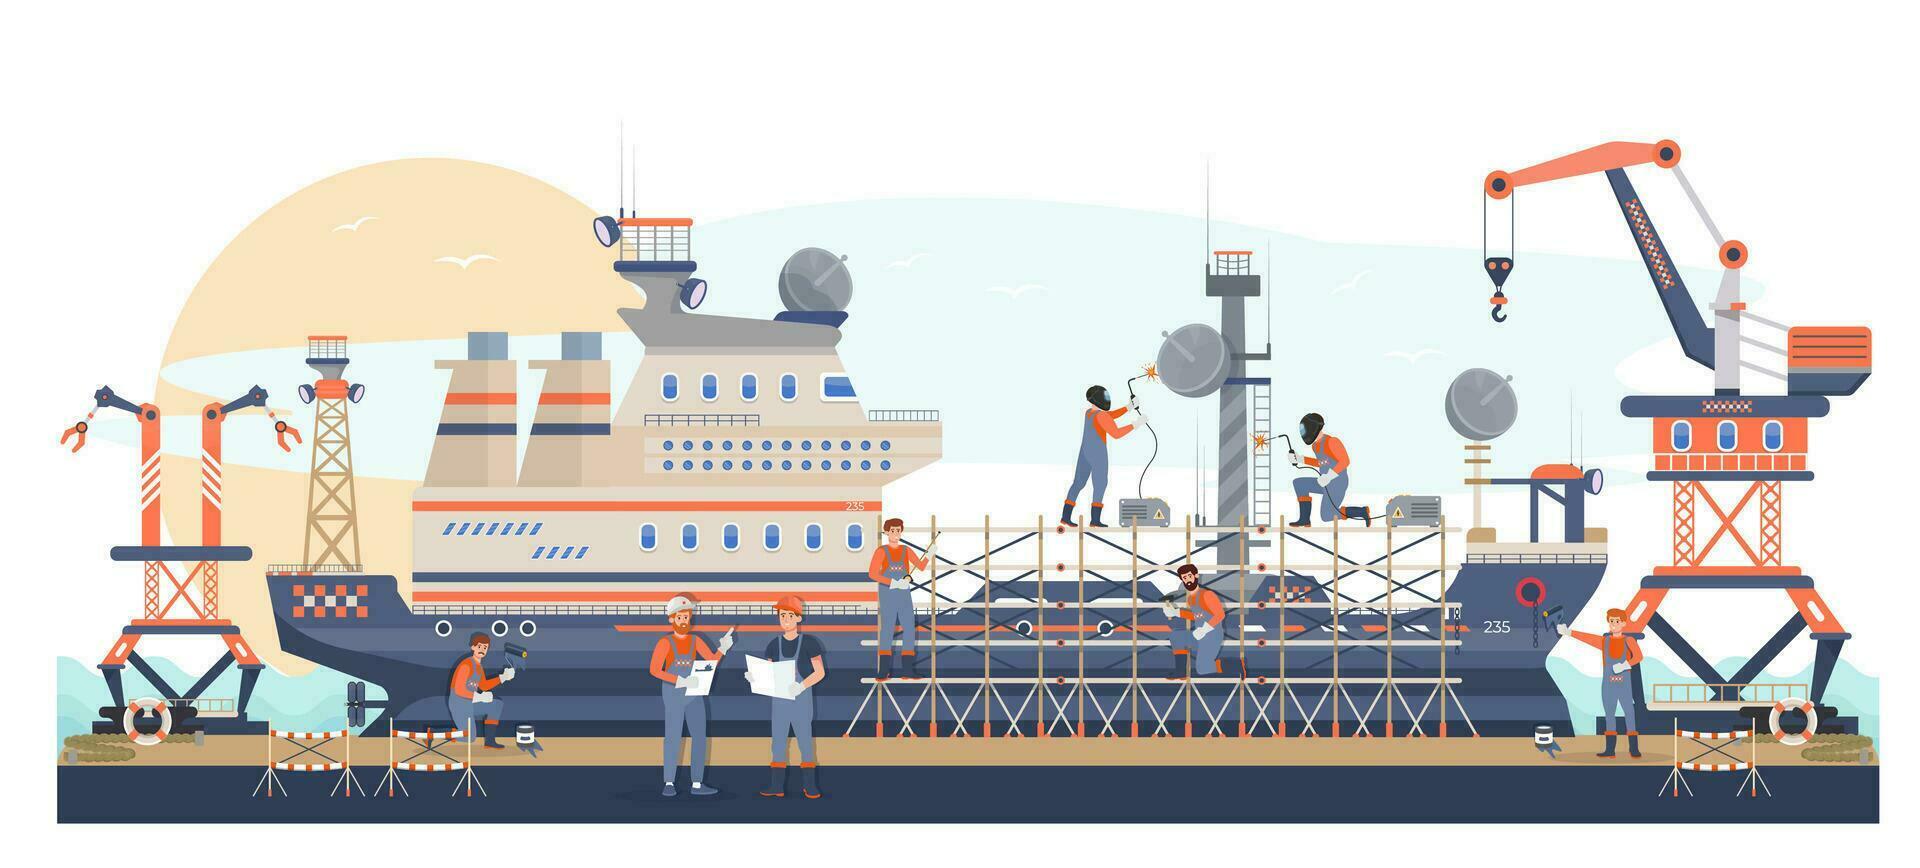 Shipbuilding site. Workers building ship in the dock. Engineers men welding metal structures, painting a vessel. Scaffolds on the ship. Shipbuilding company, plant. Marine industry. Flat vector .